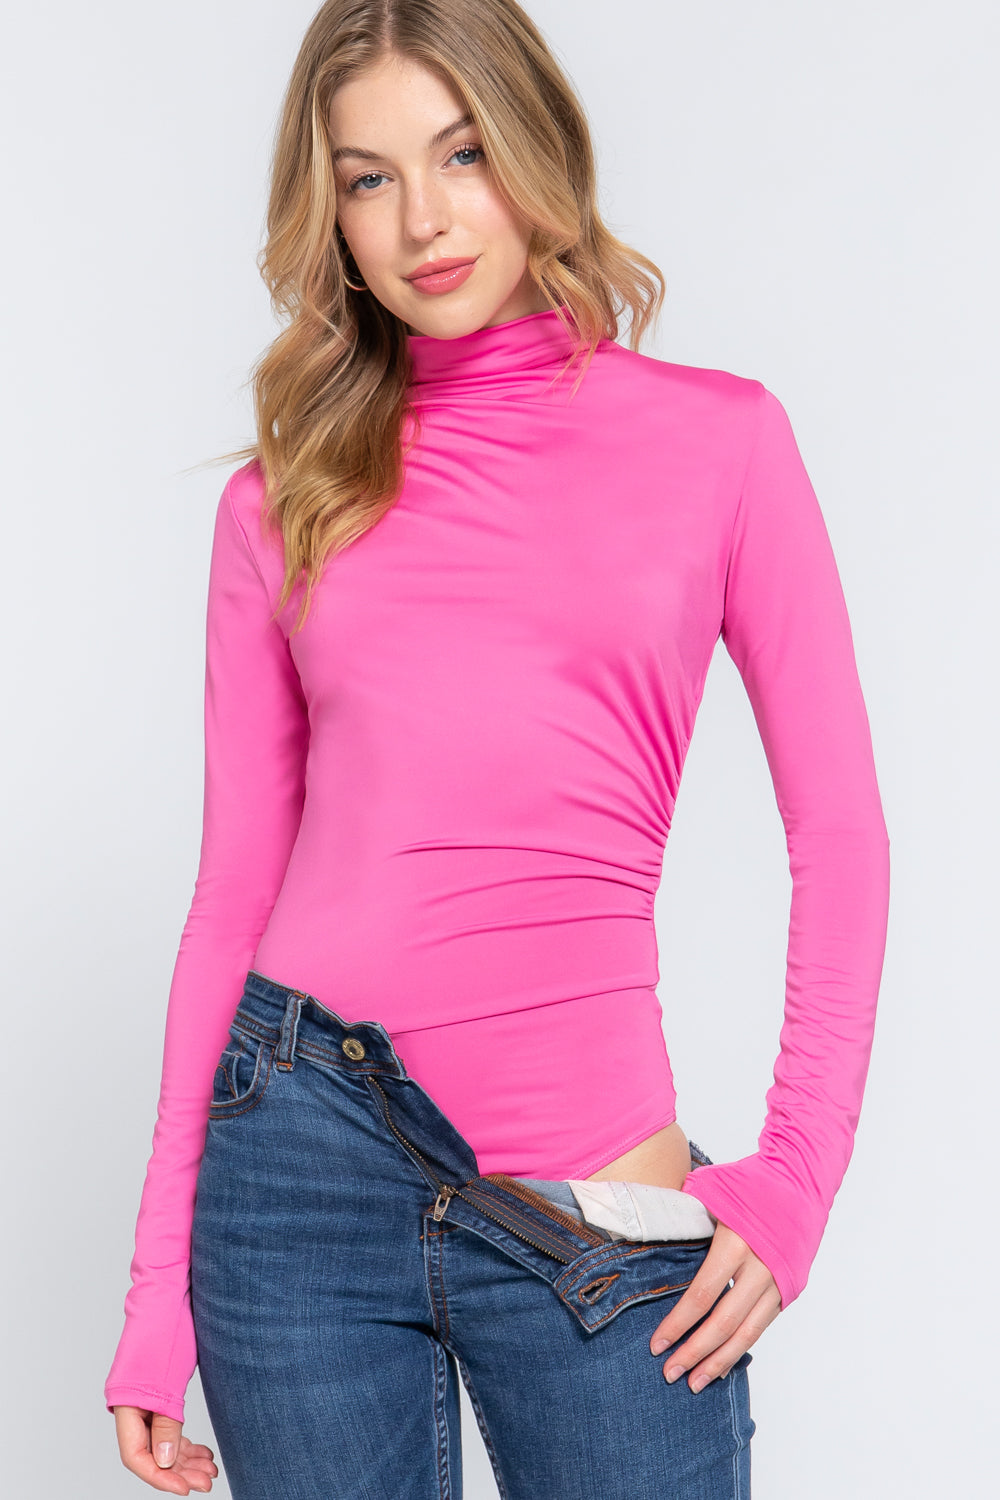 Pink - Long Sleeve High Neck Shirring Detail Ity Knit Bodysuit - 3 colors - womens bodysuit at TFC&H Co.